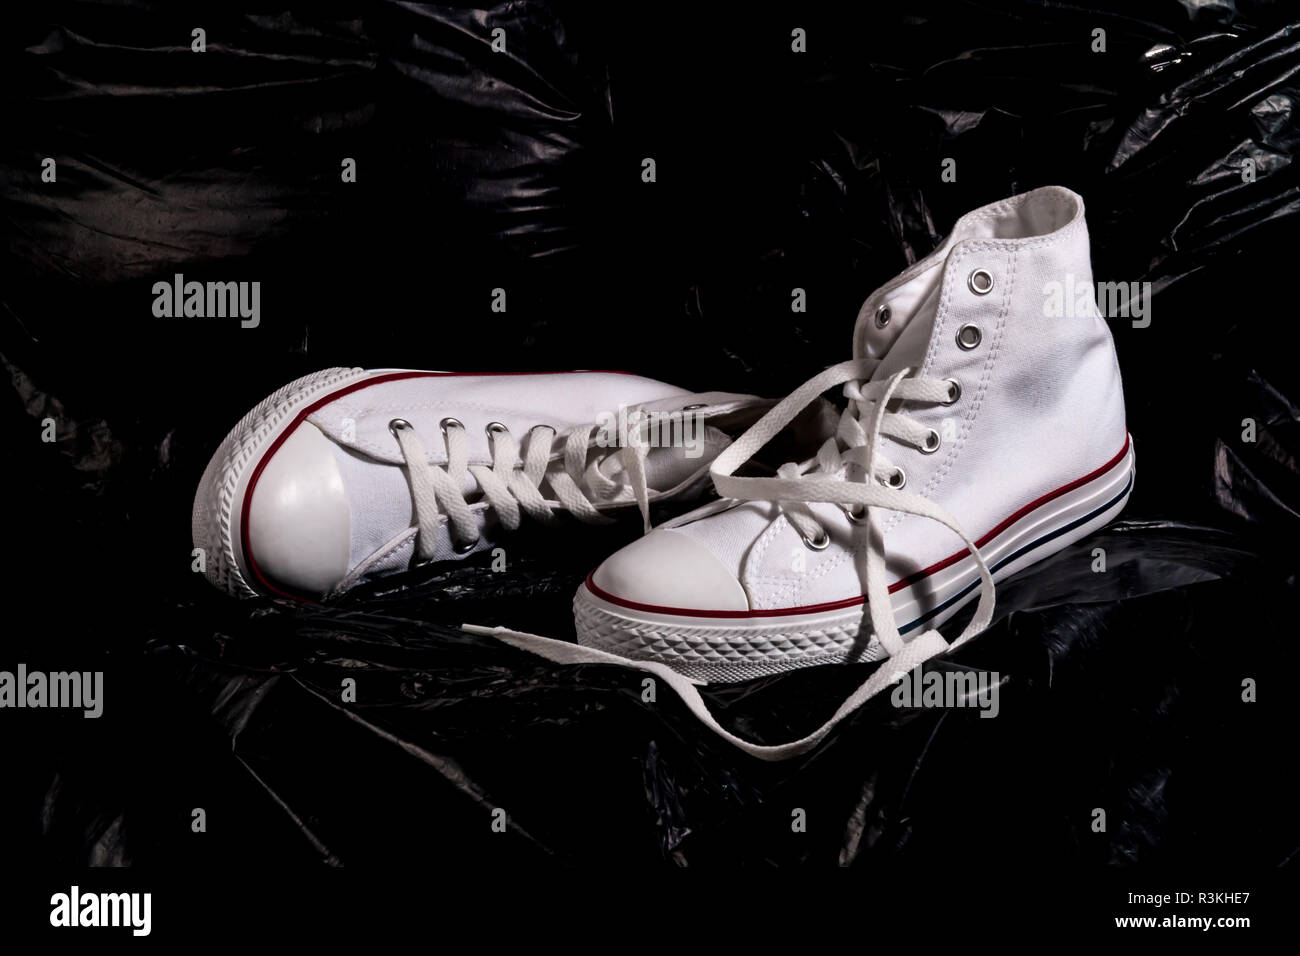 Converse Allstar High Resolution Stock Photography and Images - Alamy